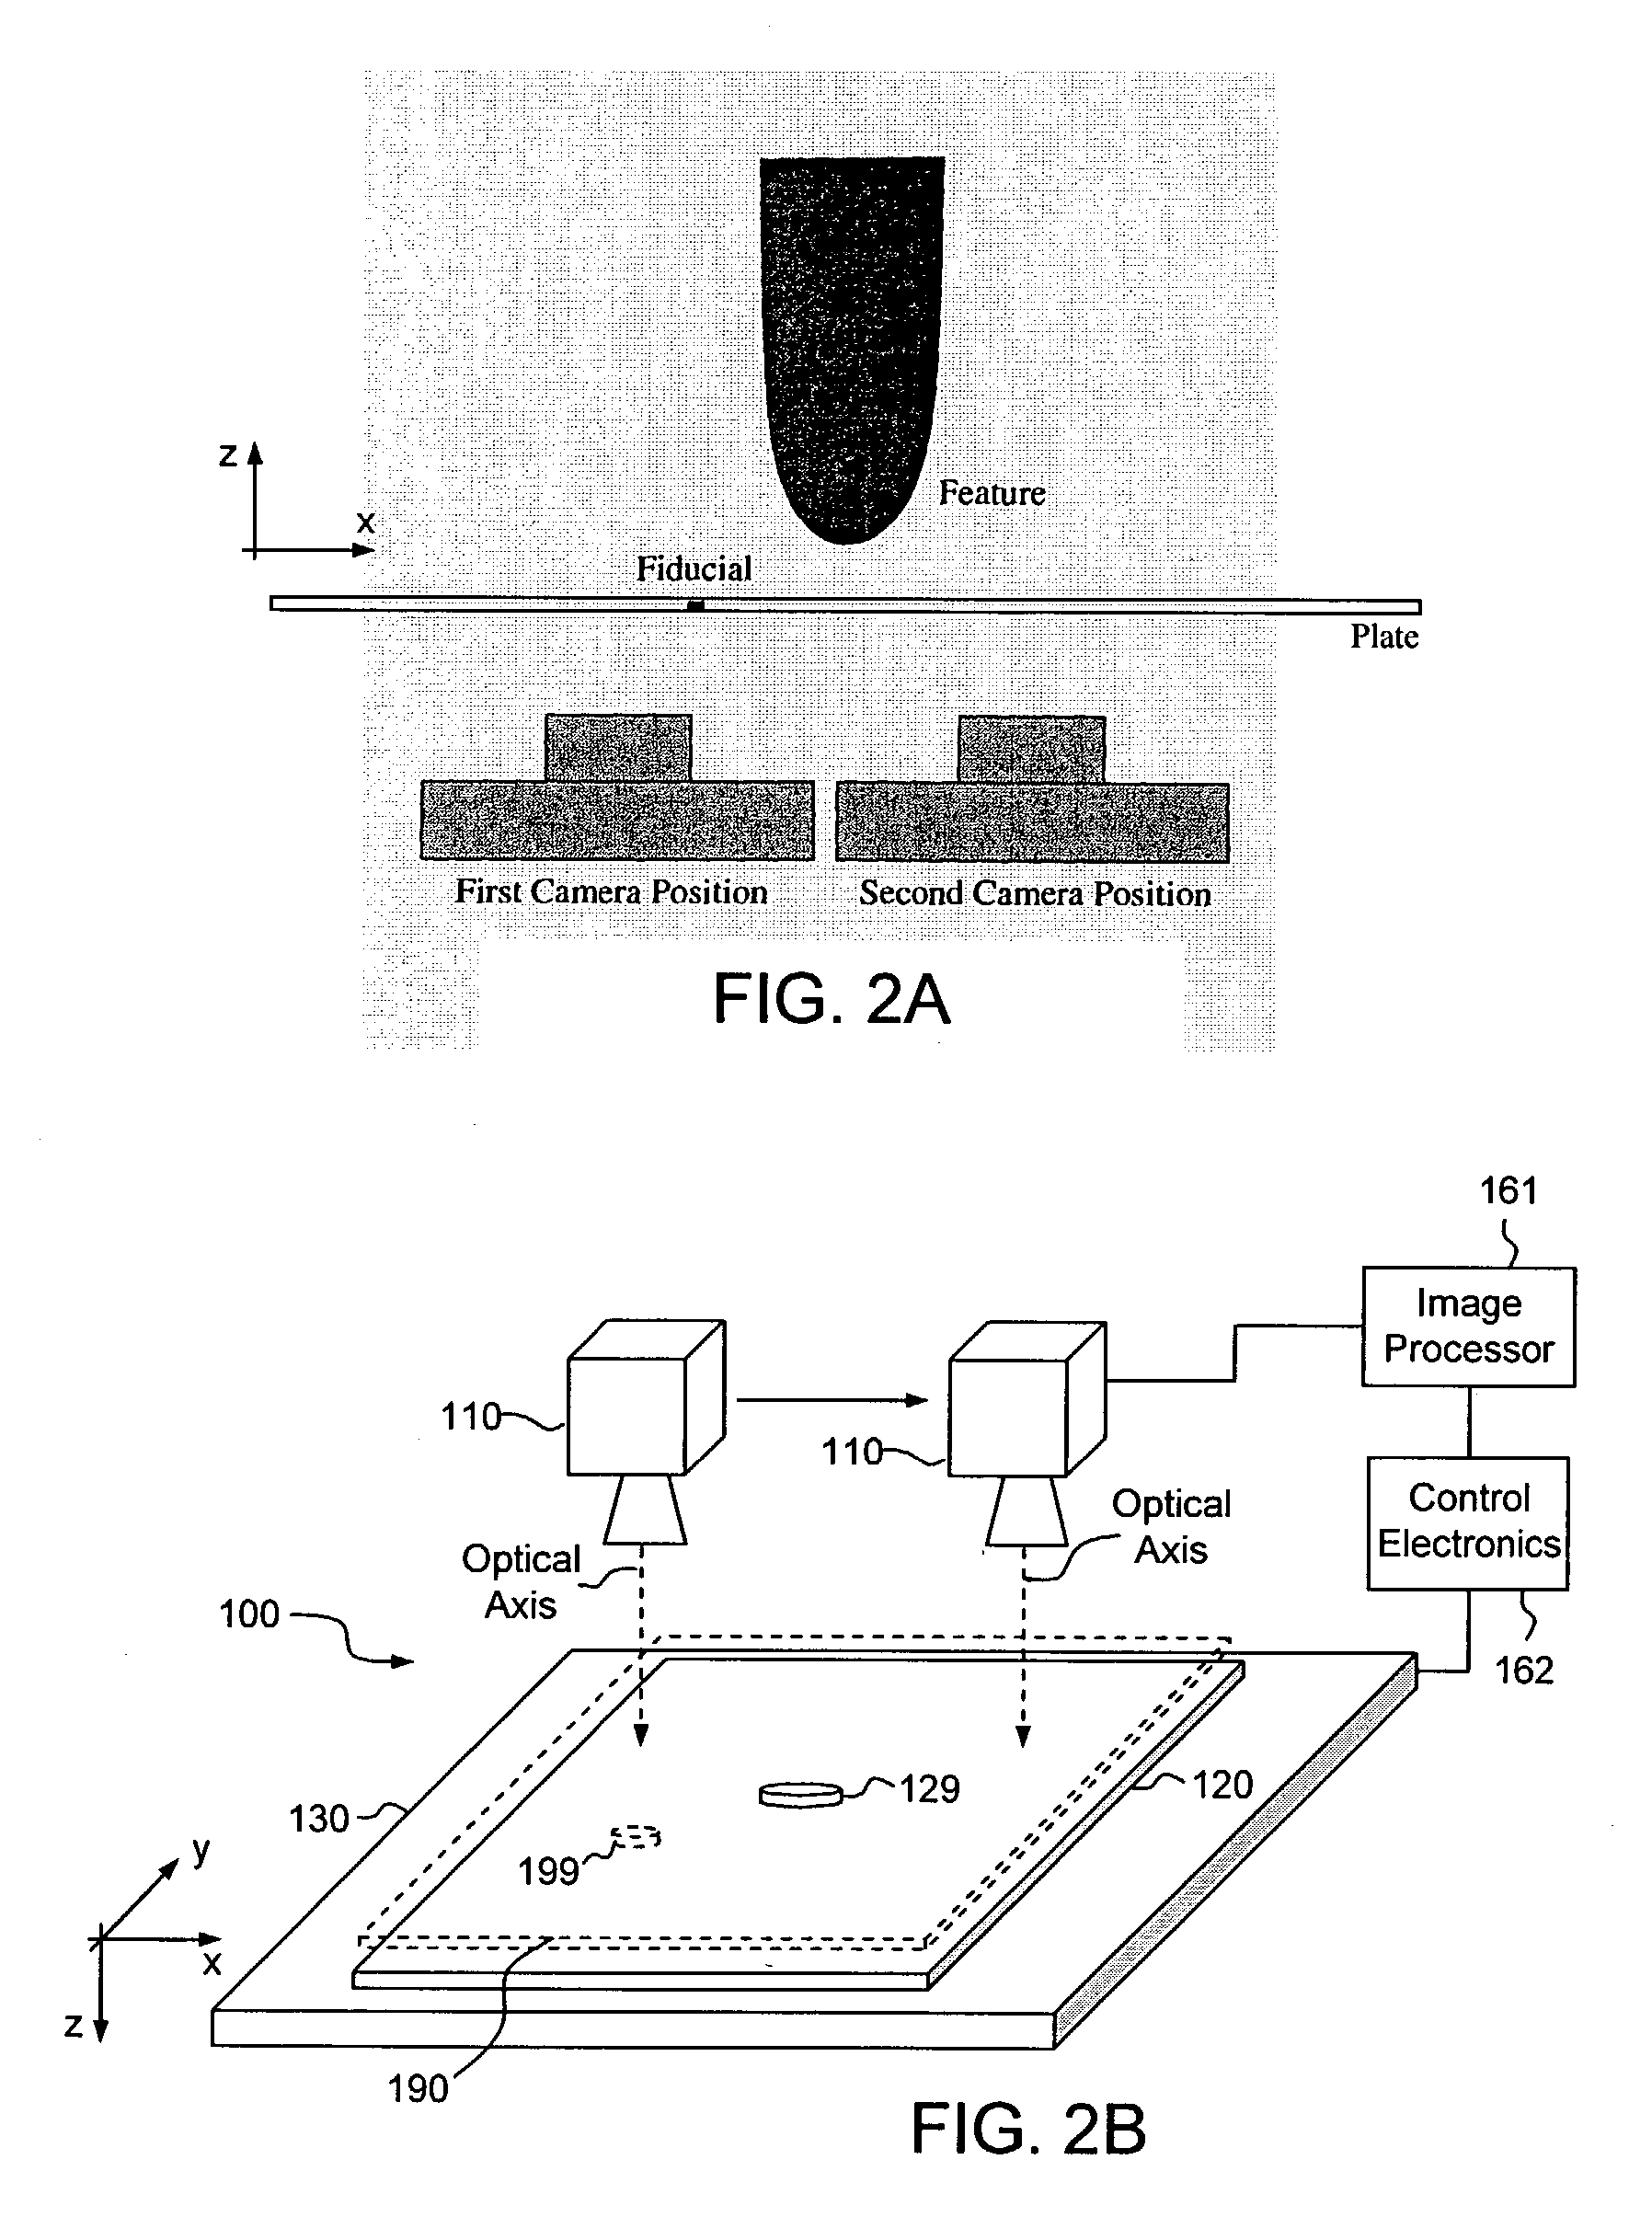 Stereoscopic three-dimensional metrology system and method